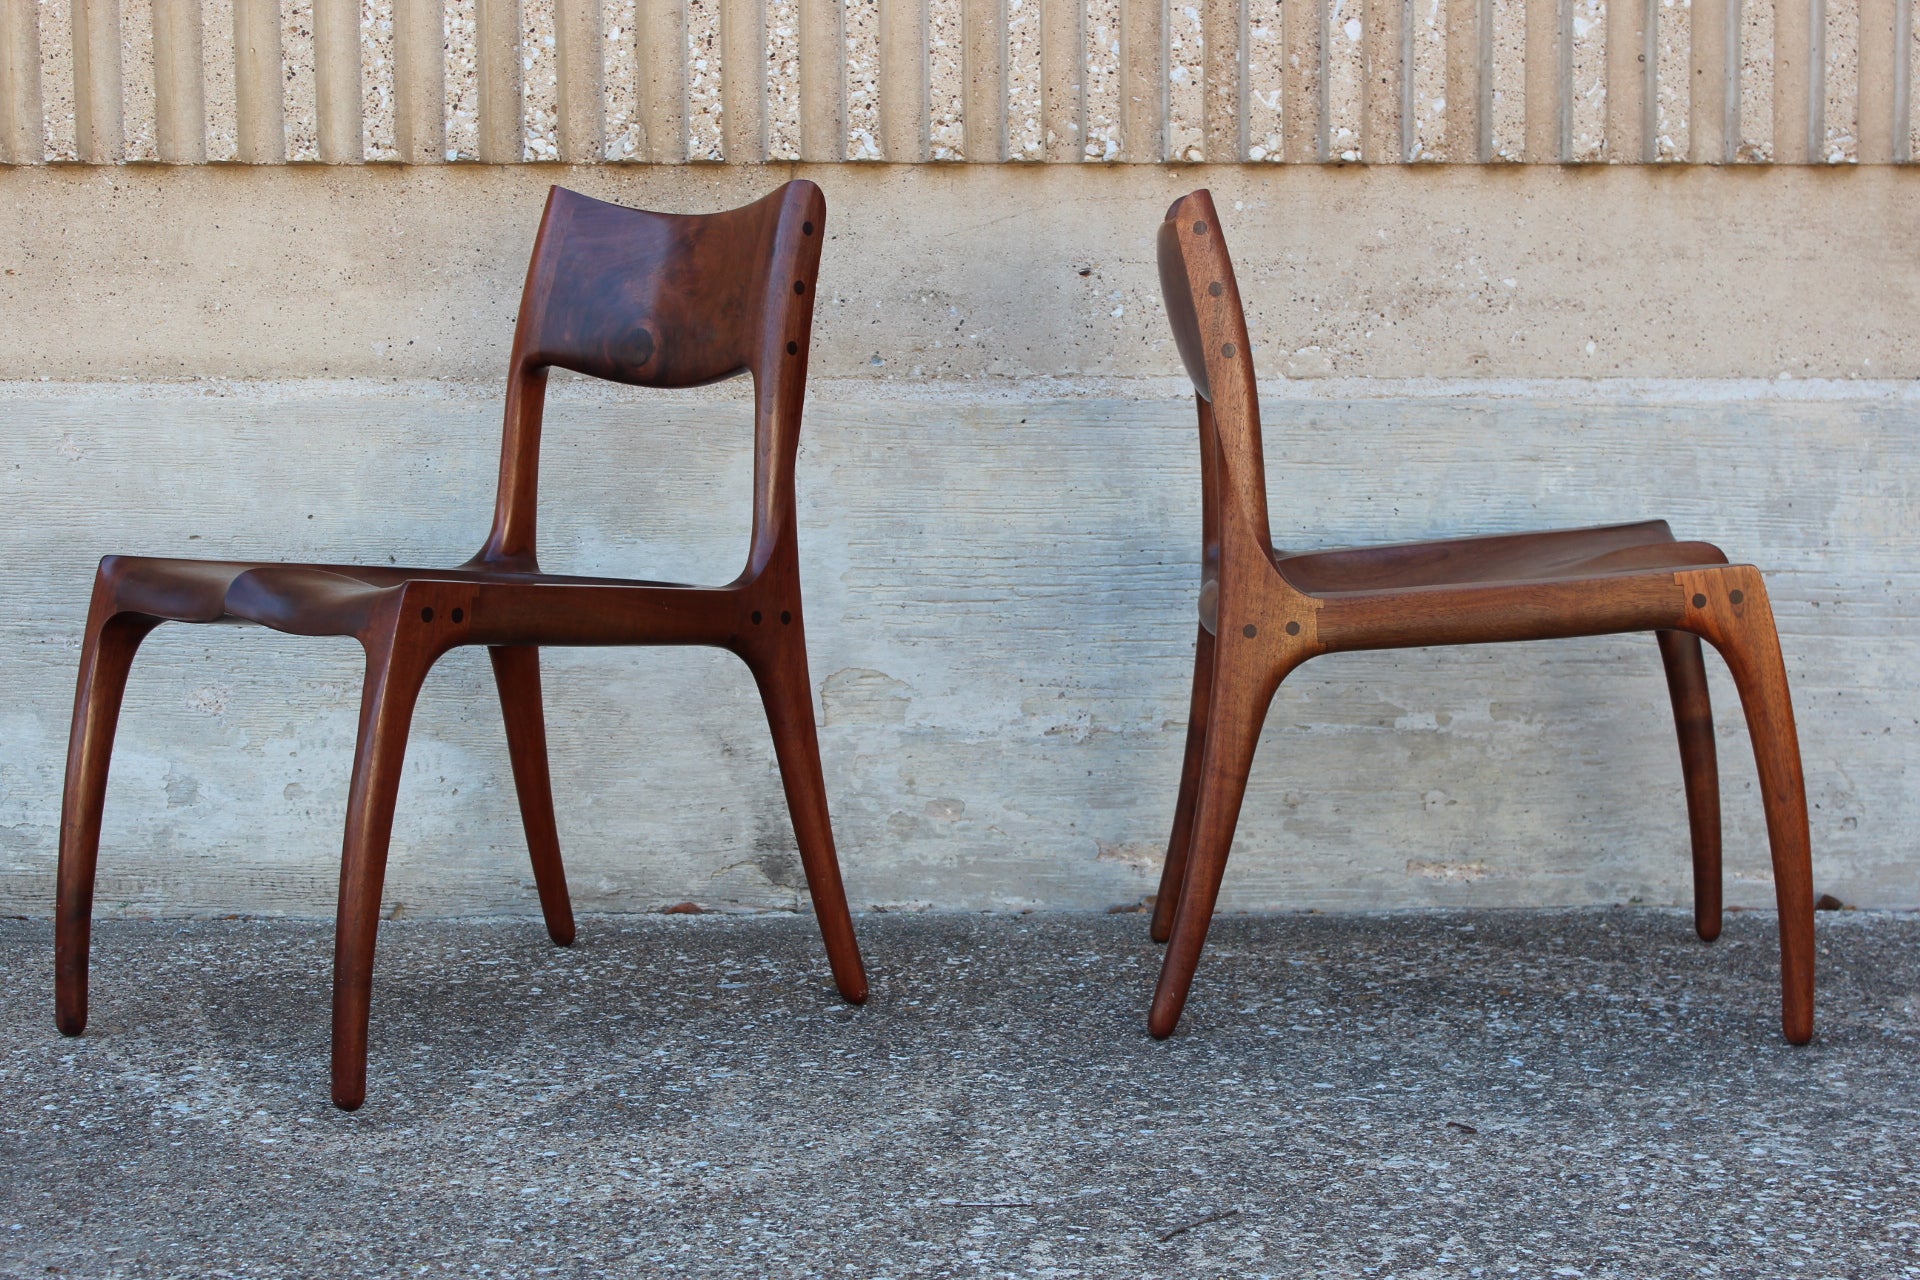 Pair of Craft Chairs by Rick Pohlers